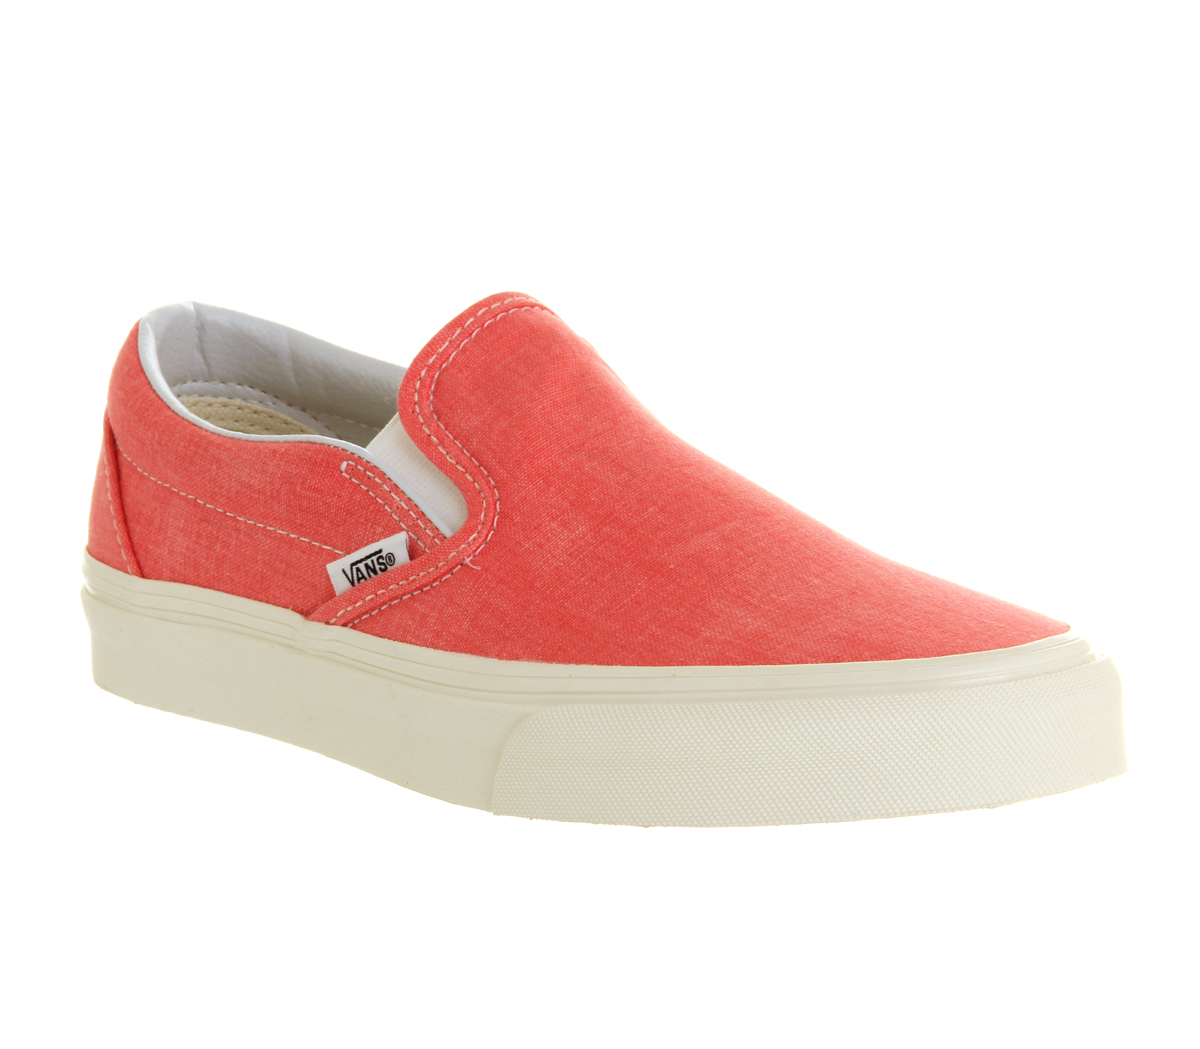 Vans Classic Slip On Shoes Washed Hot 